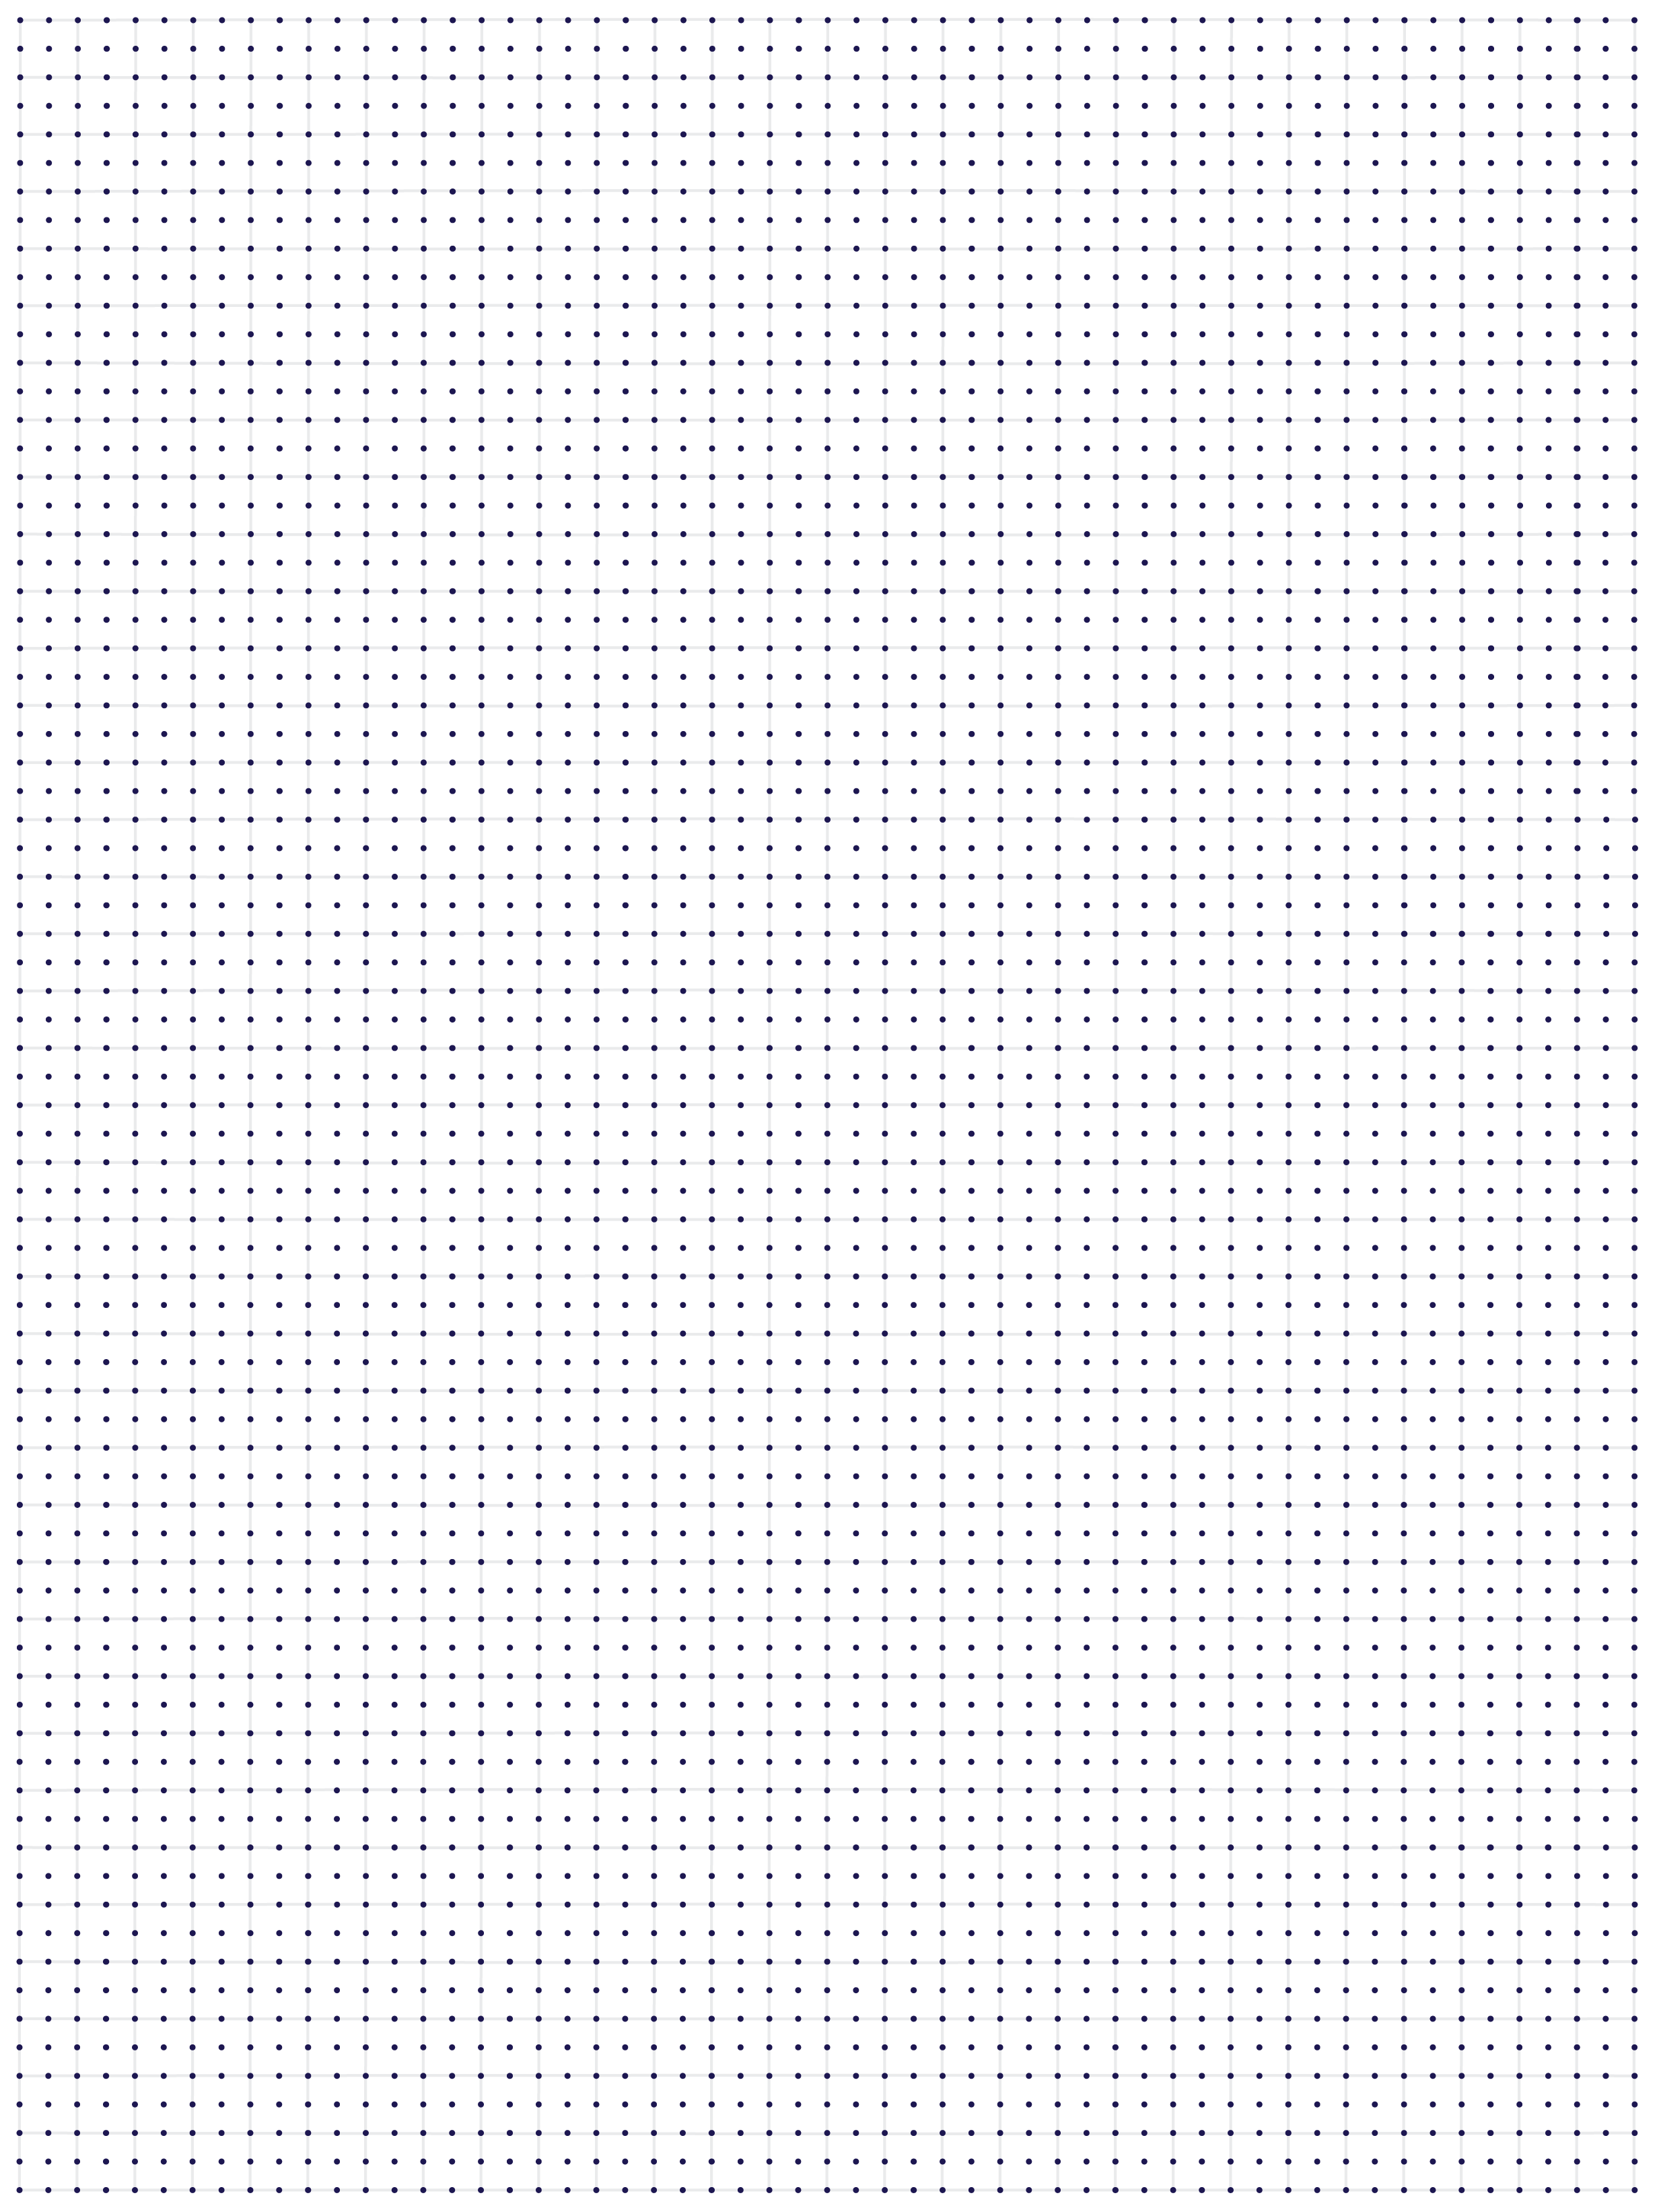 printable dot grid paper with background lines